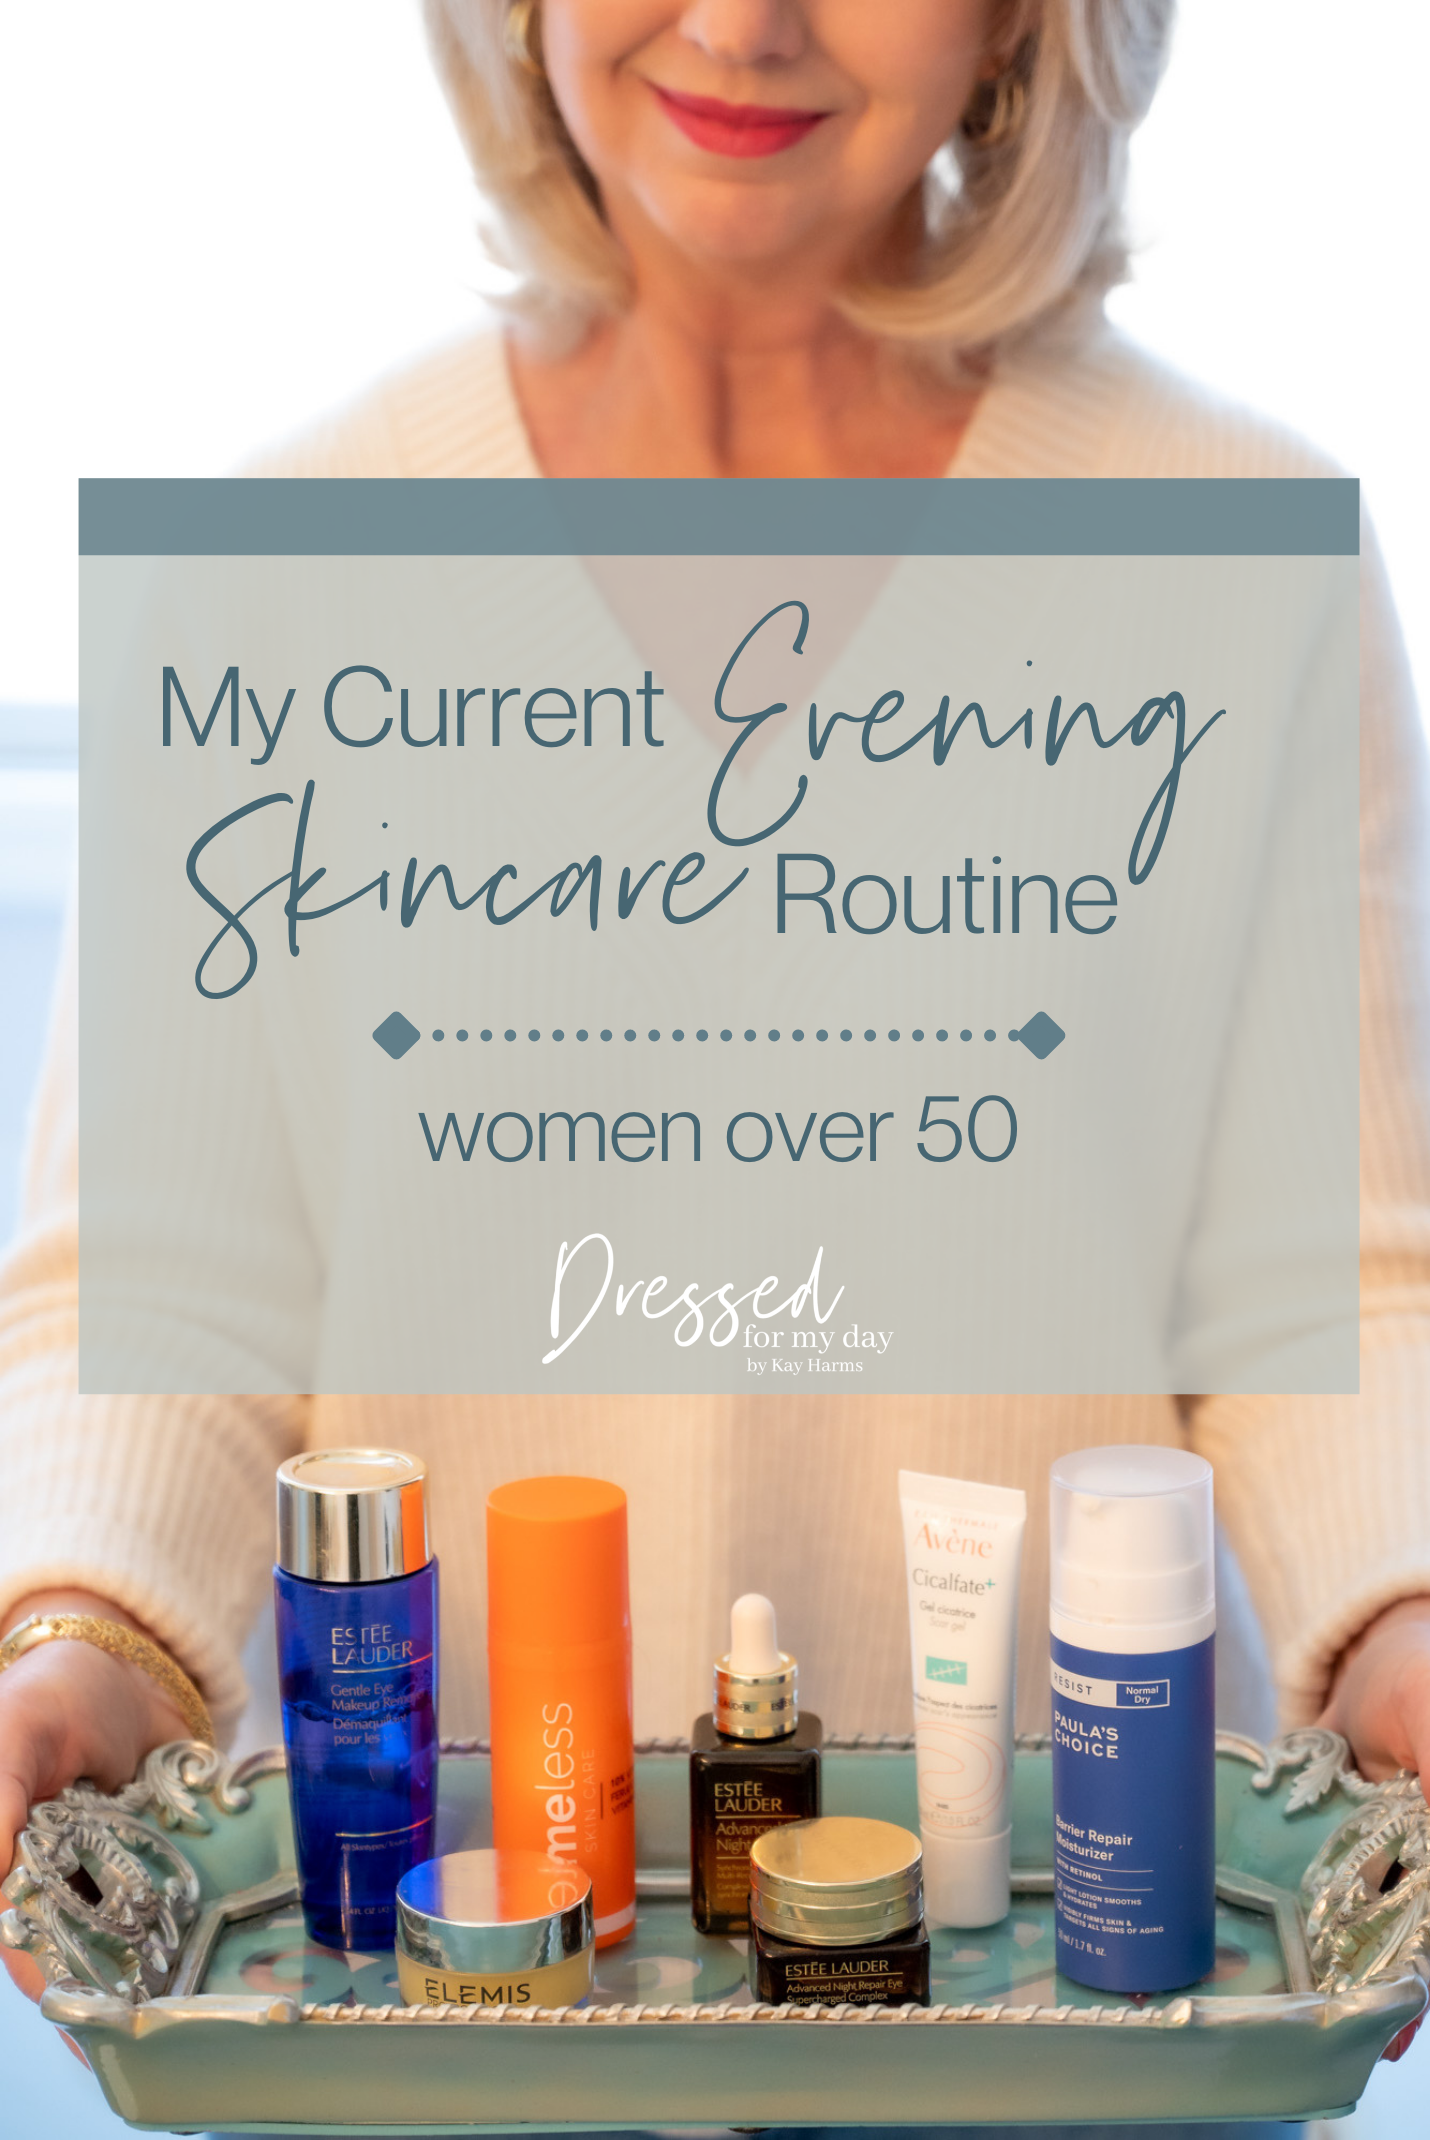 Evening Skincare Routine for Women Over 50